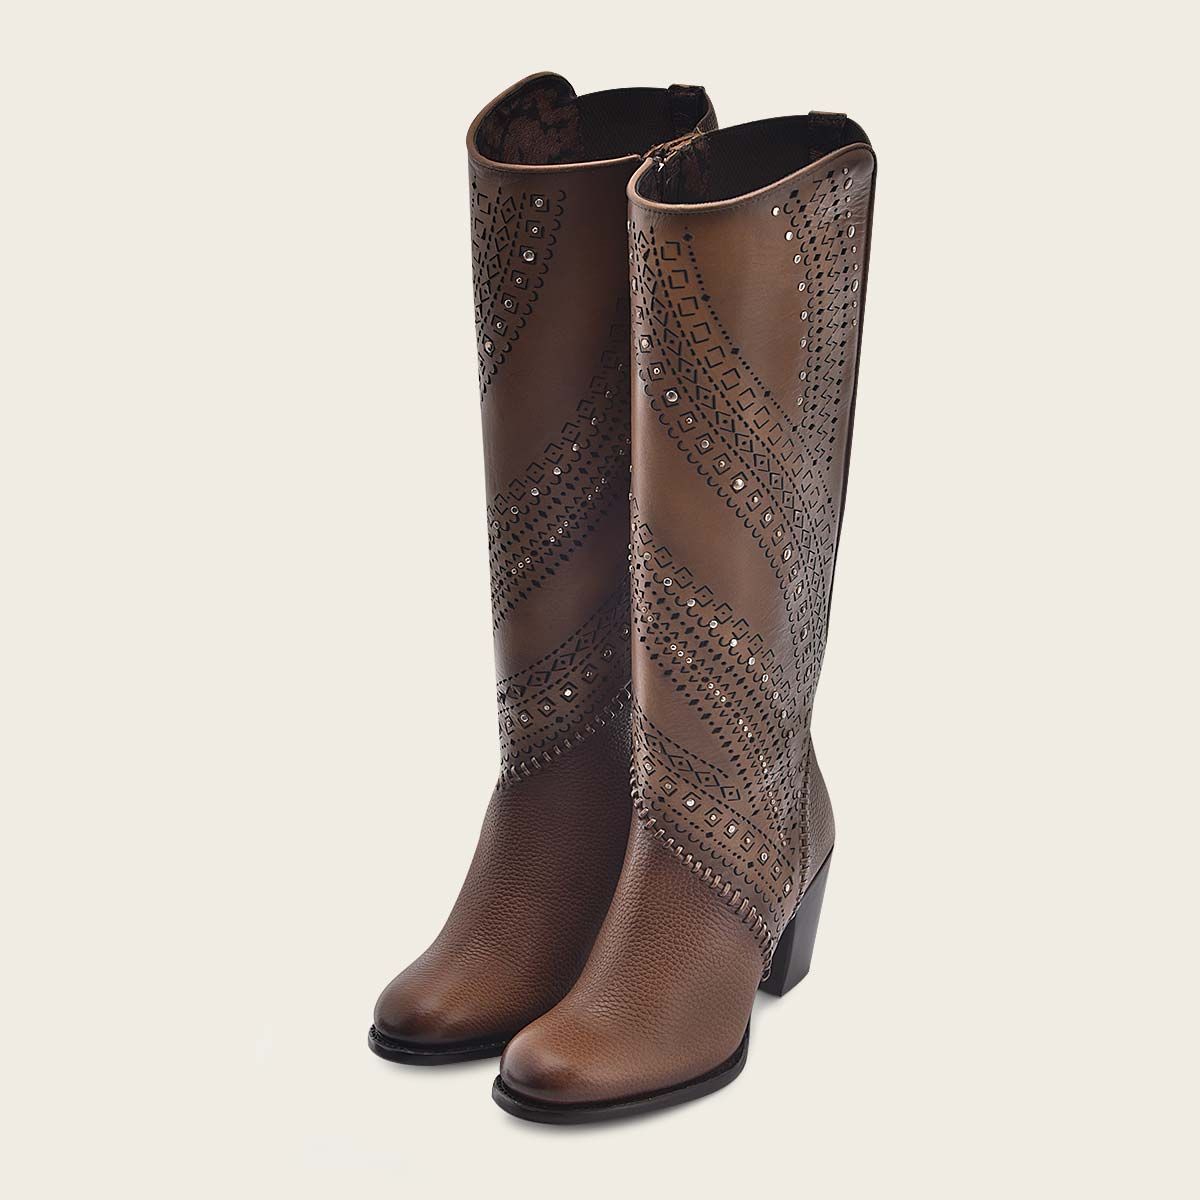 Decorated brown leather tall boot with perforations